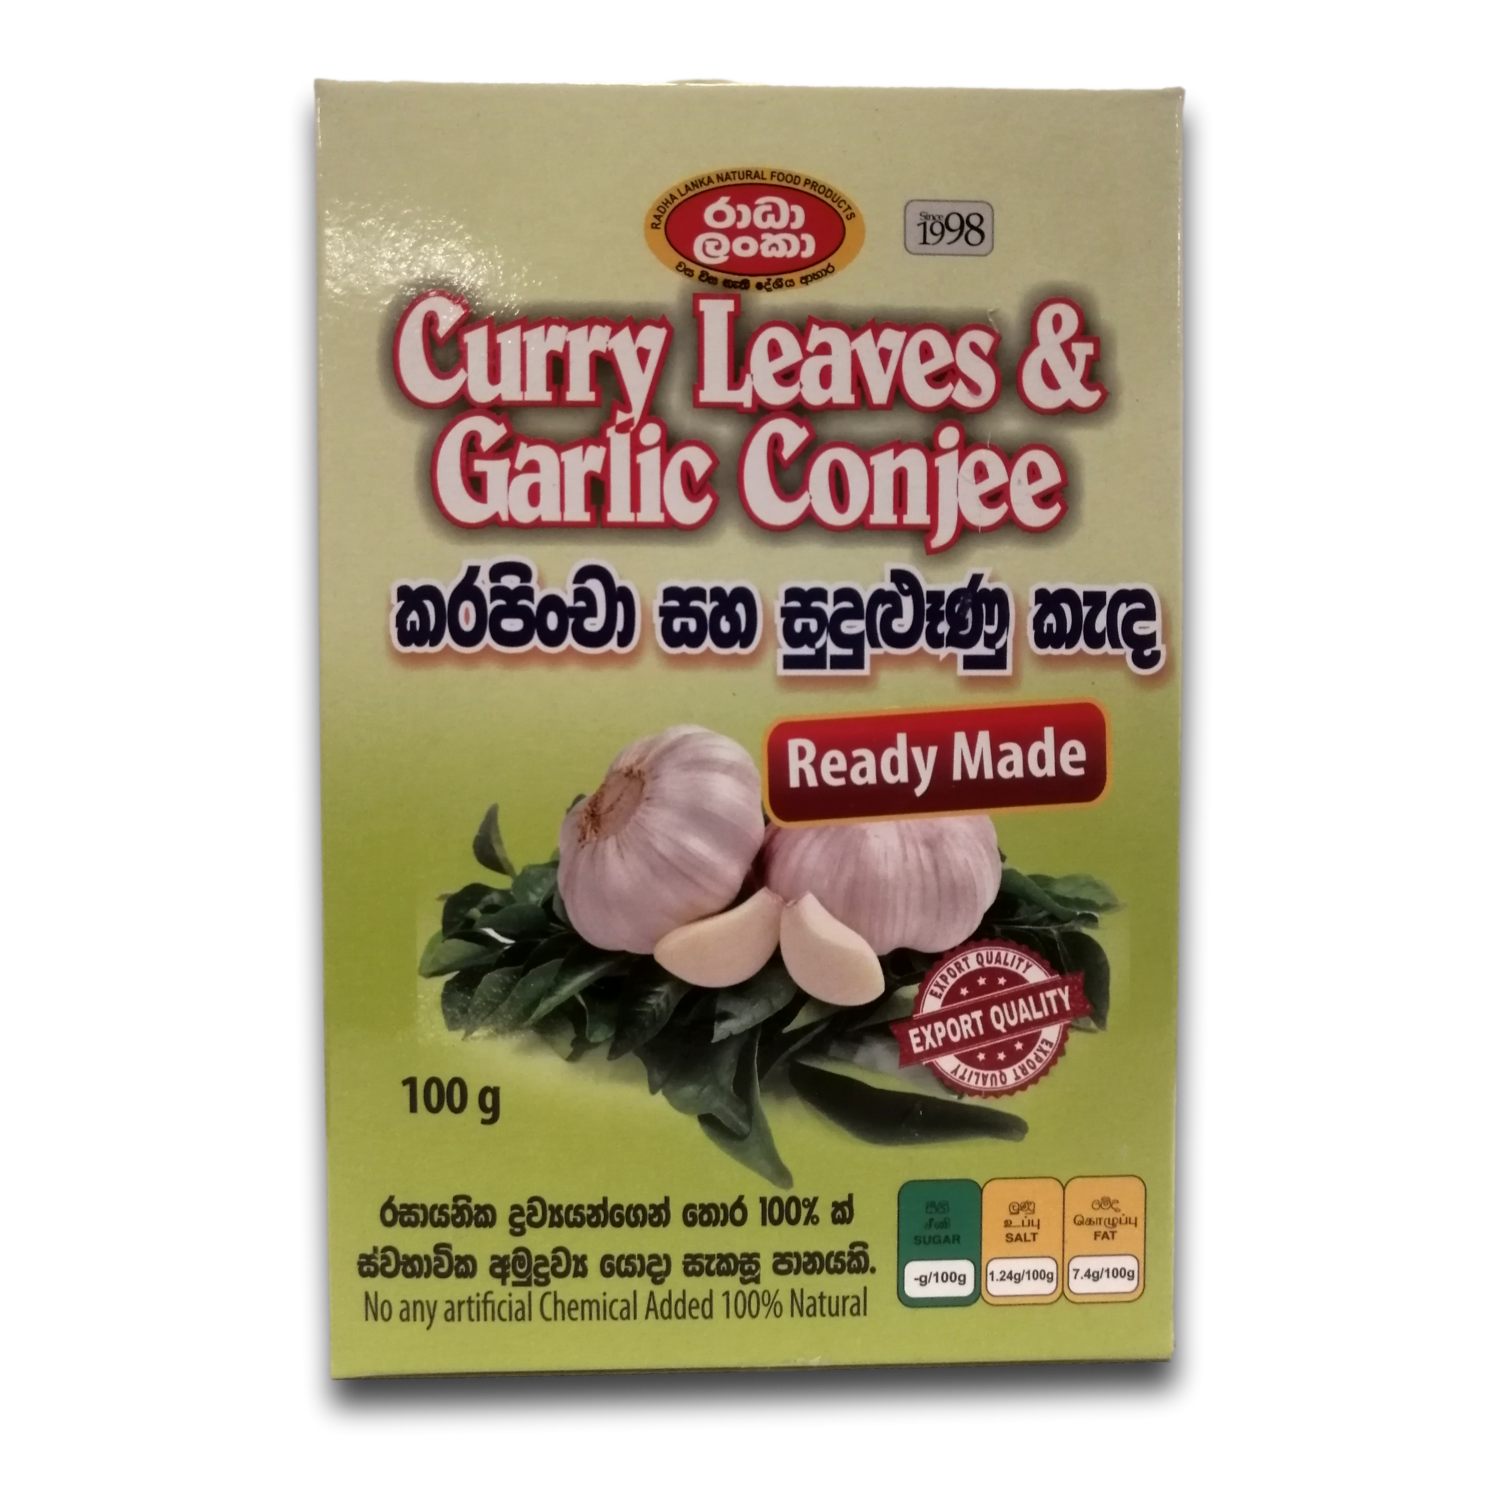 Curry Leaves & Garlic Conjee